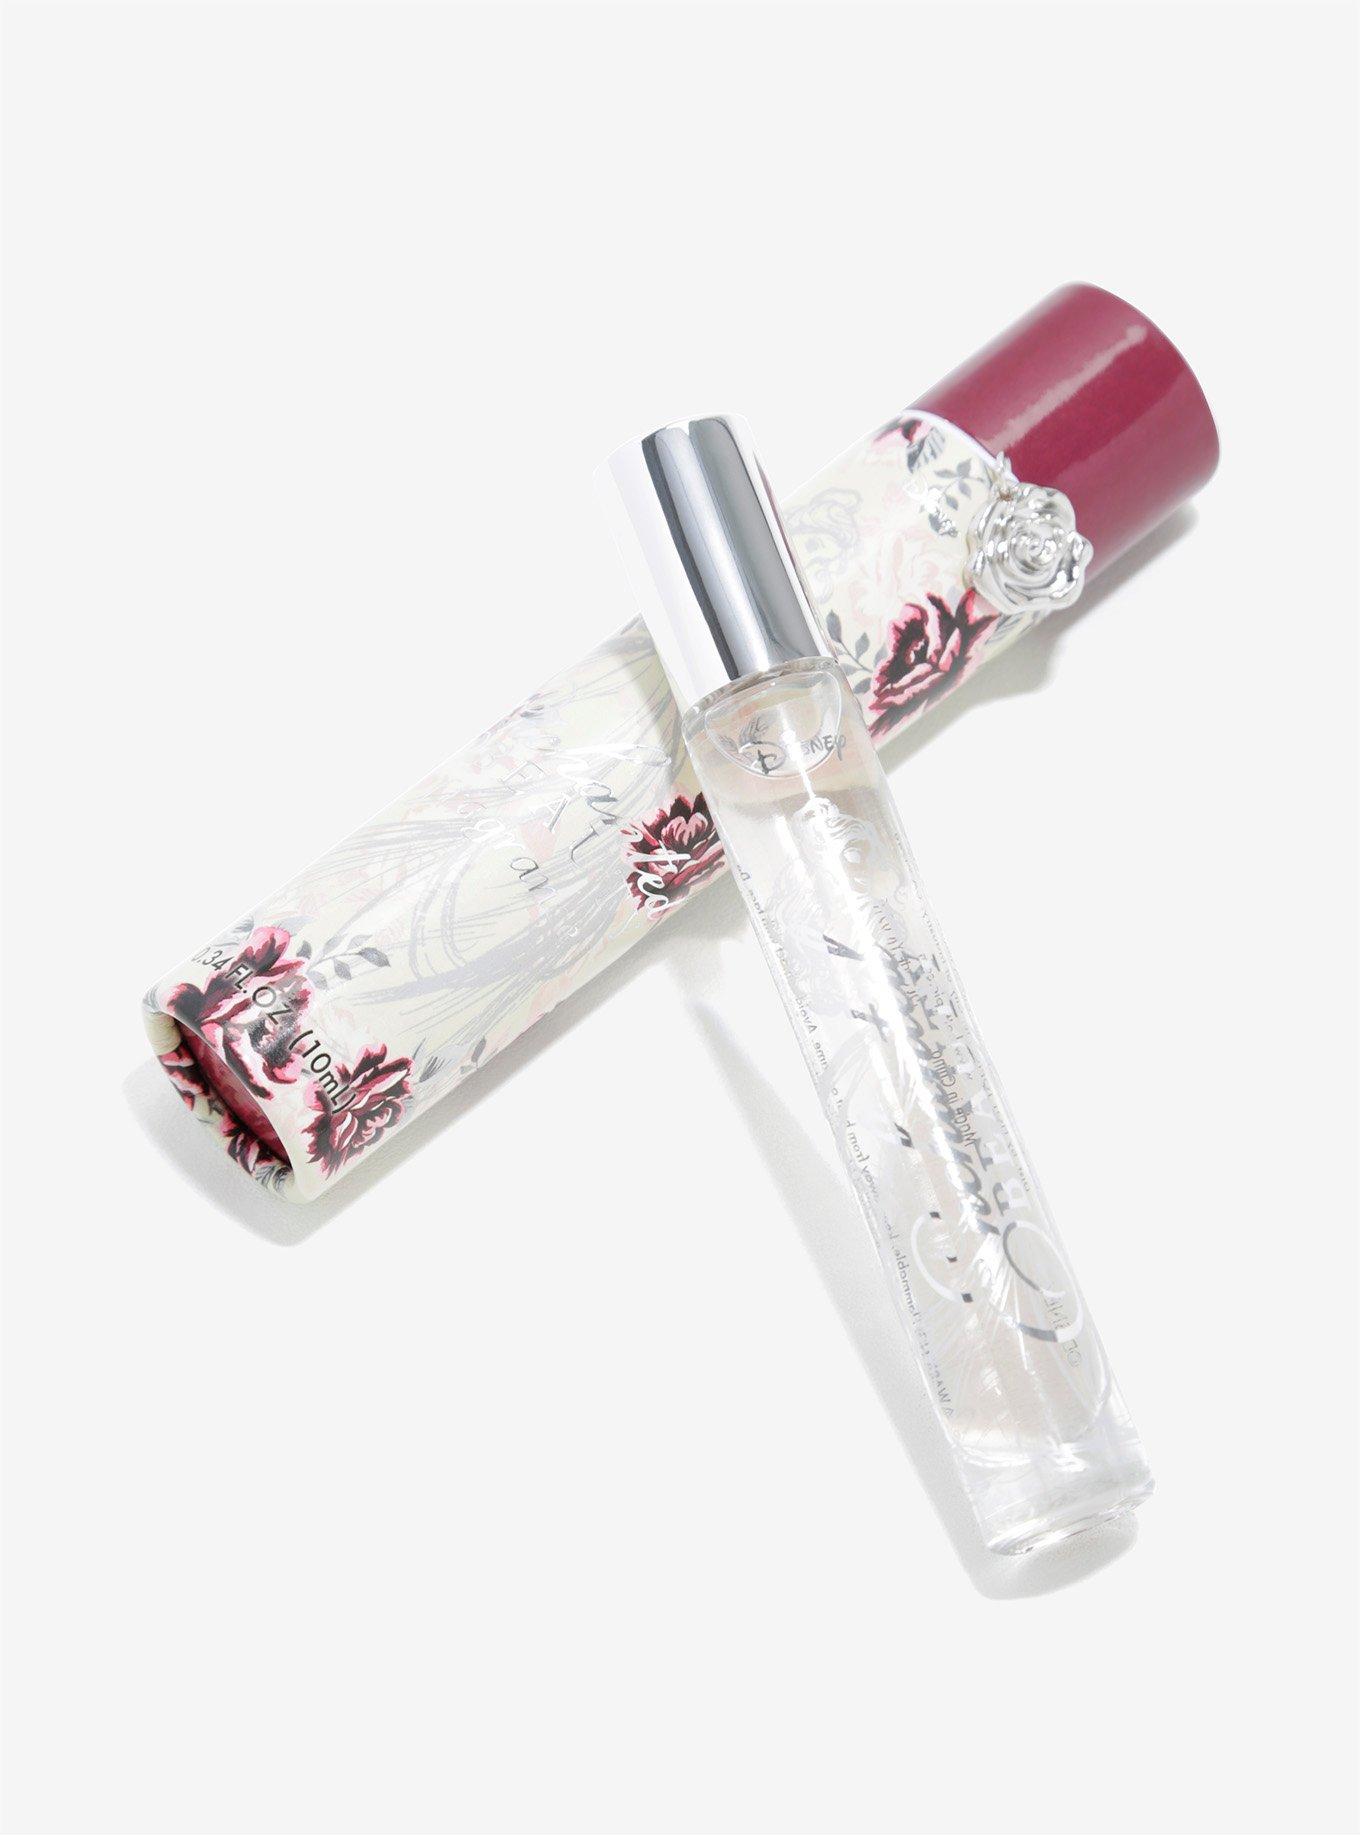 Disney Beauty And The Beast Enchanted Beauty Mini Rollerball Fragrance, , hi-res